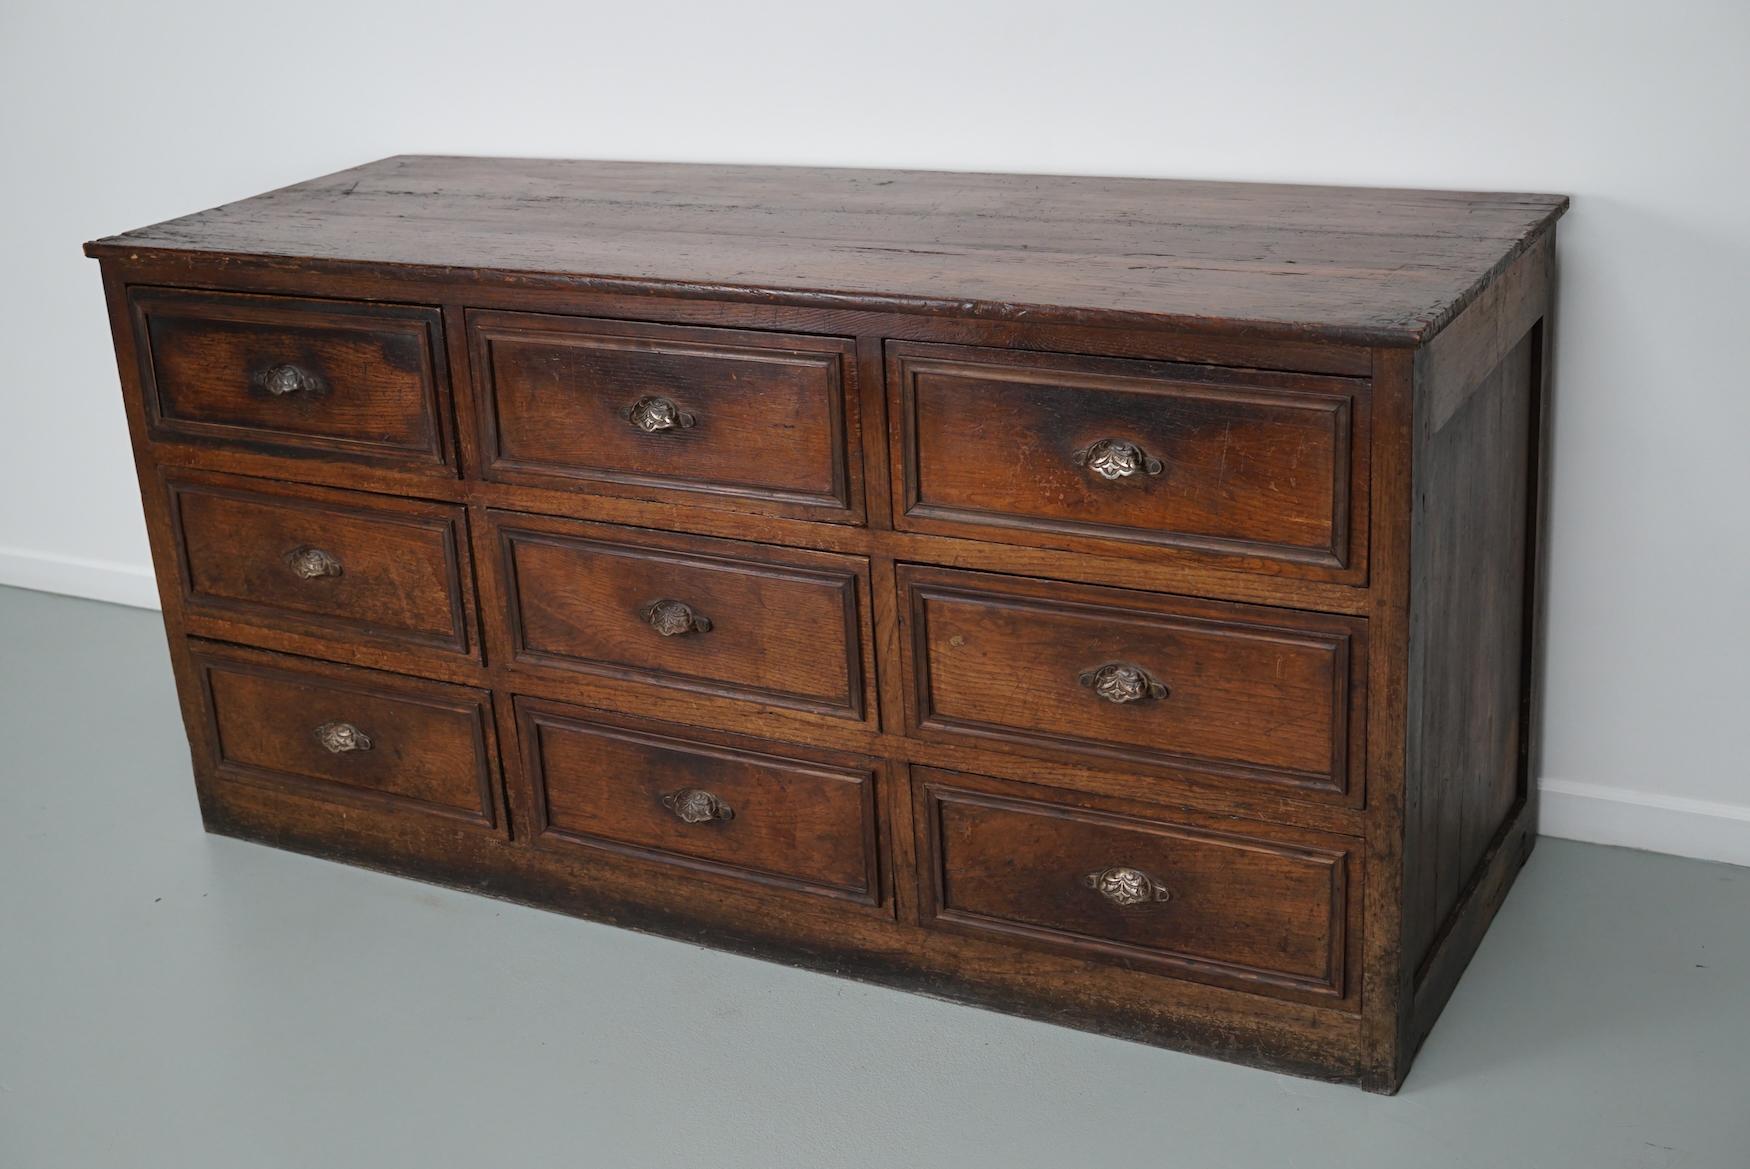 Antique French Oak & Fruitwood Apothecary / Filing Cabinet, Early 20th Century For Sale 5